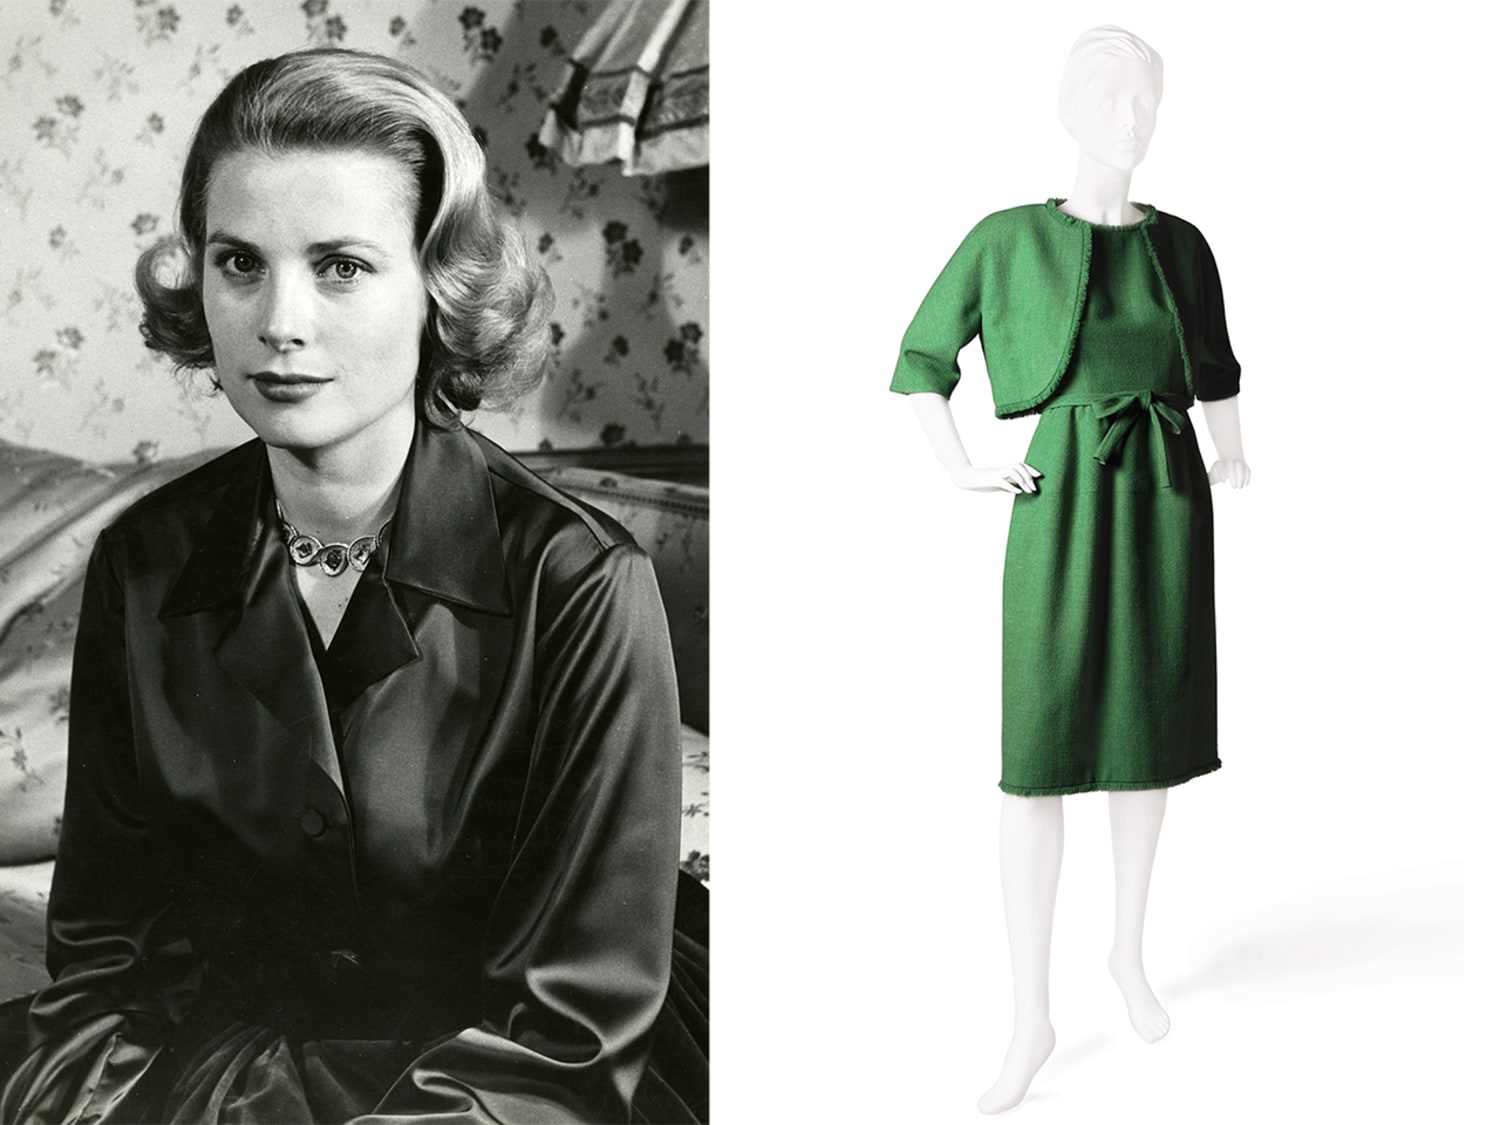 Princess Grace exhibit highlights icon's personal style, private royal life